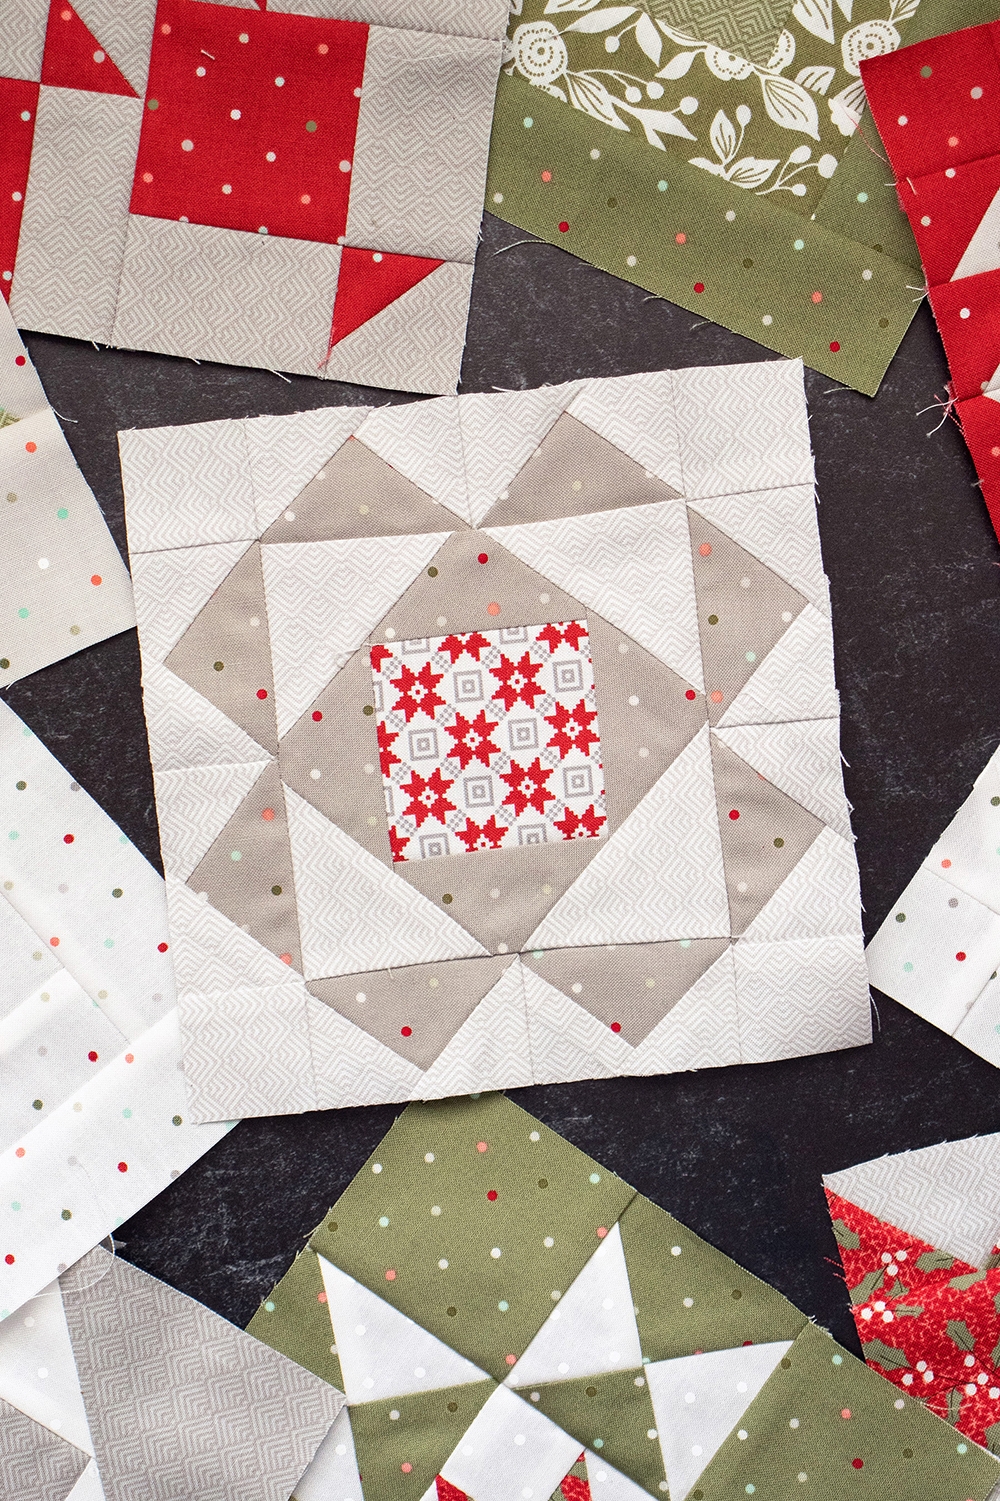 Sewcialites Quilt Along: Free Block of the Week. Block 19 is "Unity" by Lissa Alexander. Fabric is Christmas Morning by Lella Boutique.